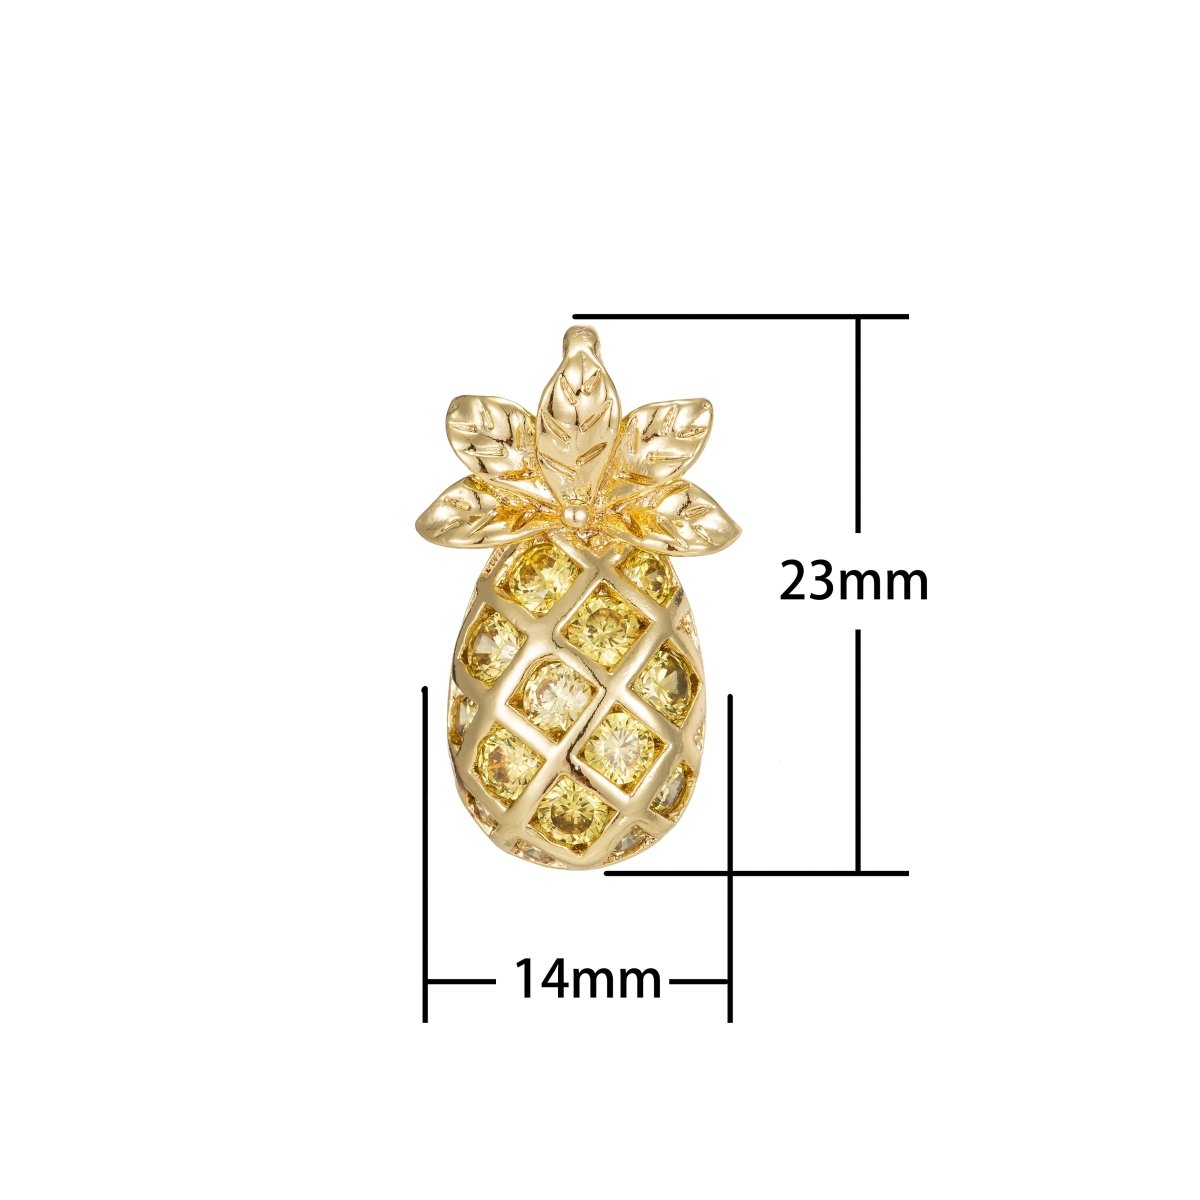 24k Gold Filled Pineapple Charm Dole Whip Pendant for Necklace Earring Bracelet Charm Fruit Inspired Jewelry Making C-638 - DLUXCA